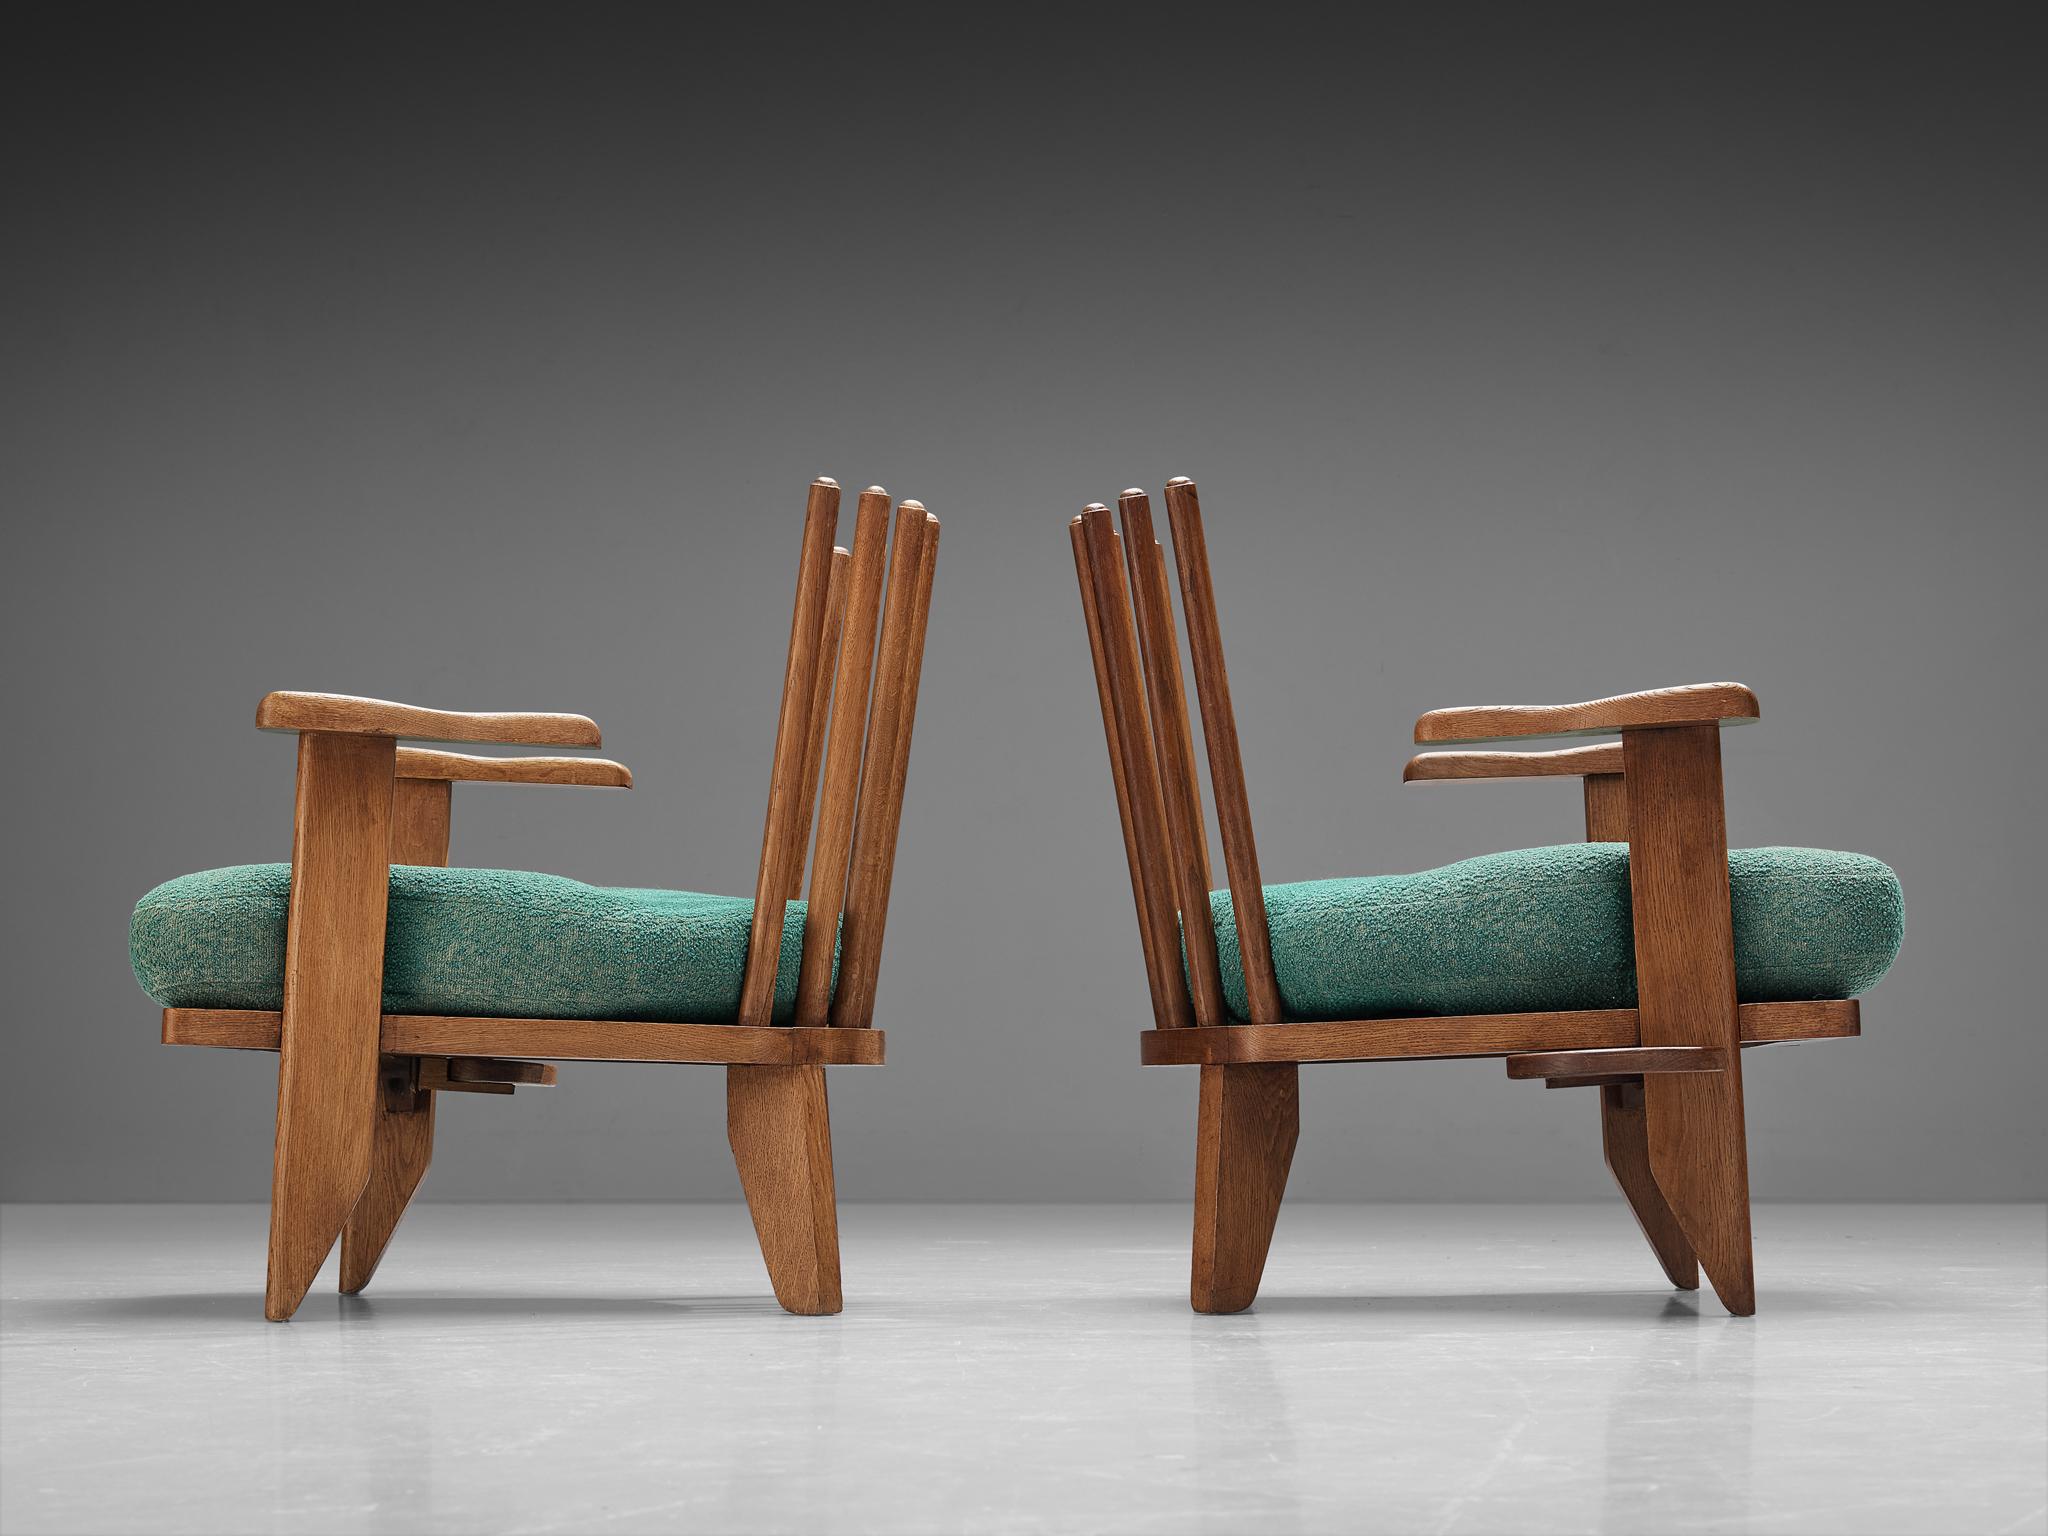 Guillerme et Chambron, lounge chairs, green fabric, oak, France, 1960s

These sculptural pair of lounge chairs are designed by Guillerme et Chambron. They are known for their high quality solid oak furniture of which this is no exception. These